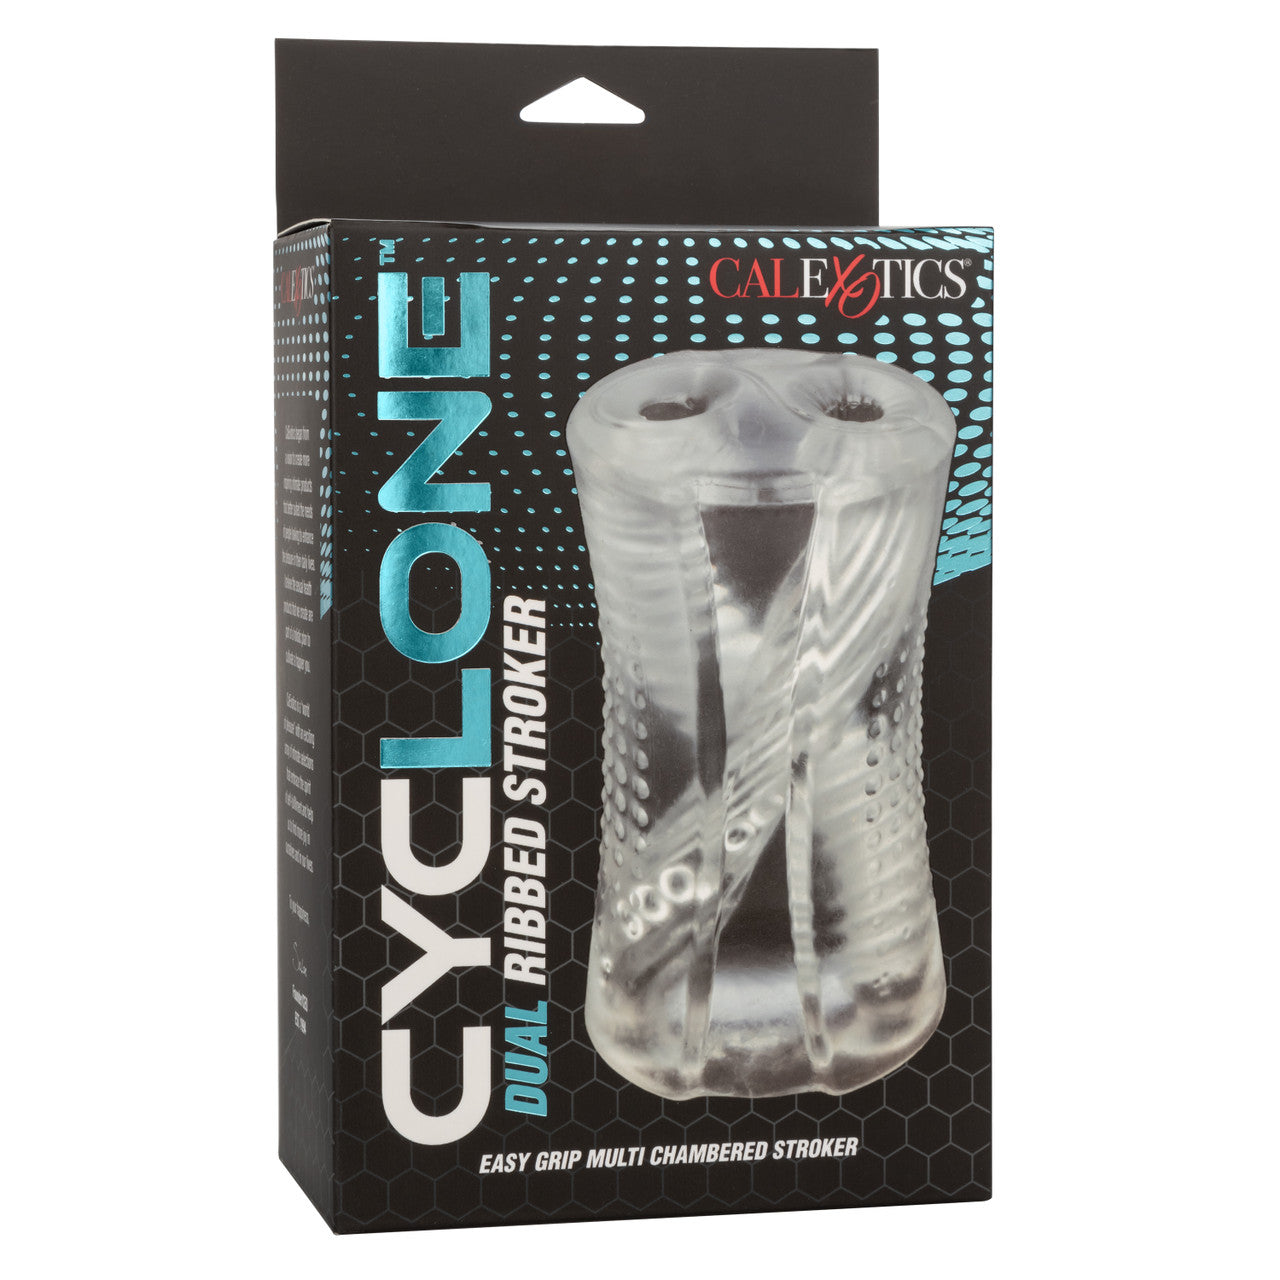 Cyclone Dual Ribbed Stroker - Thorn & Feather